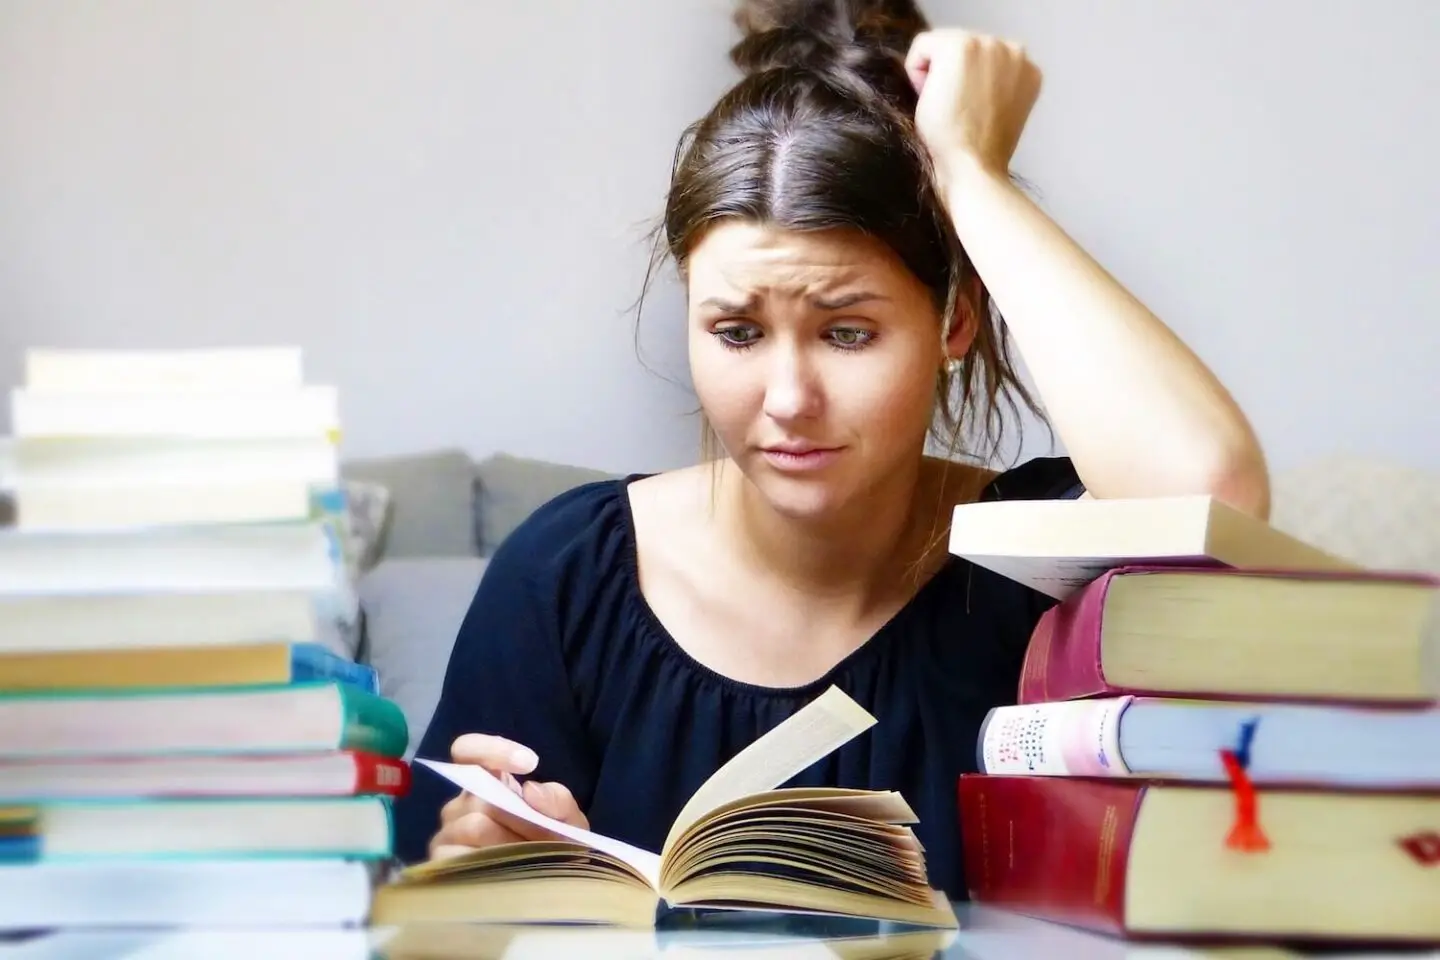 A woman sitting at a table with stacks of books. She looks frazzled as he looks at one of them